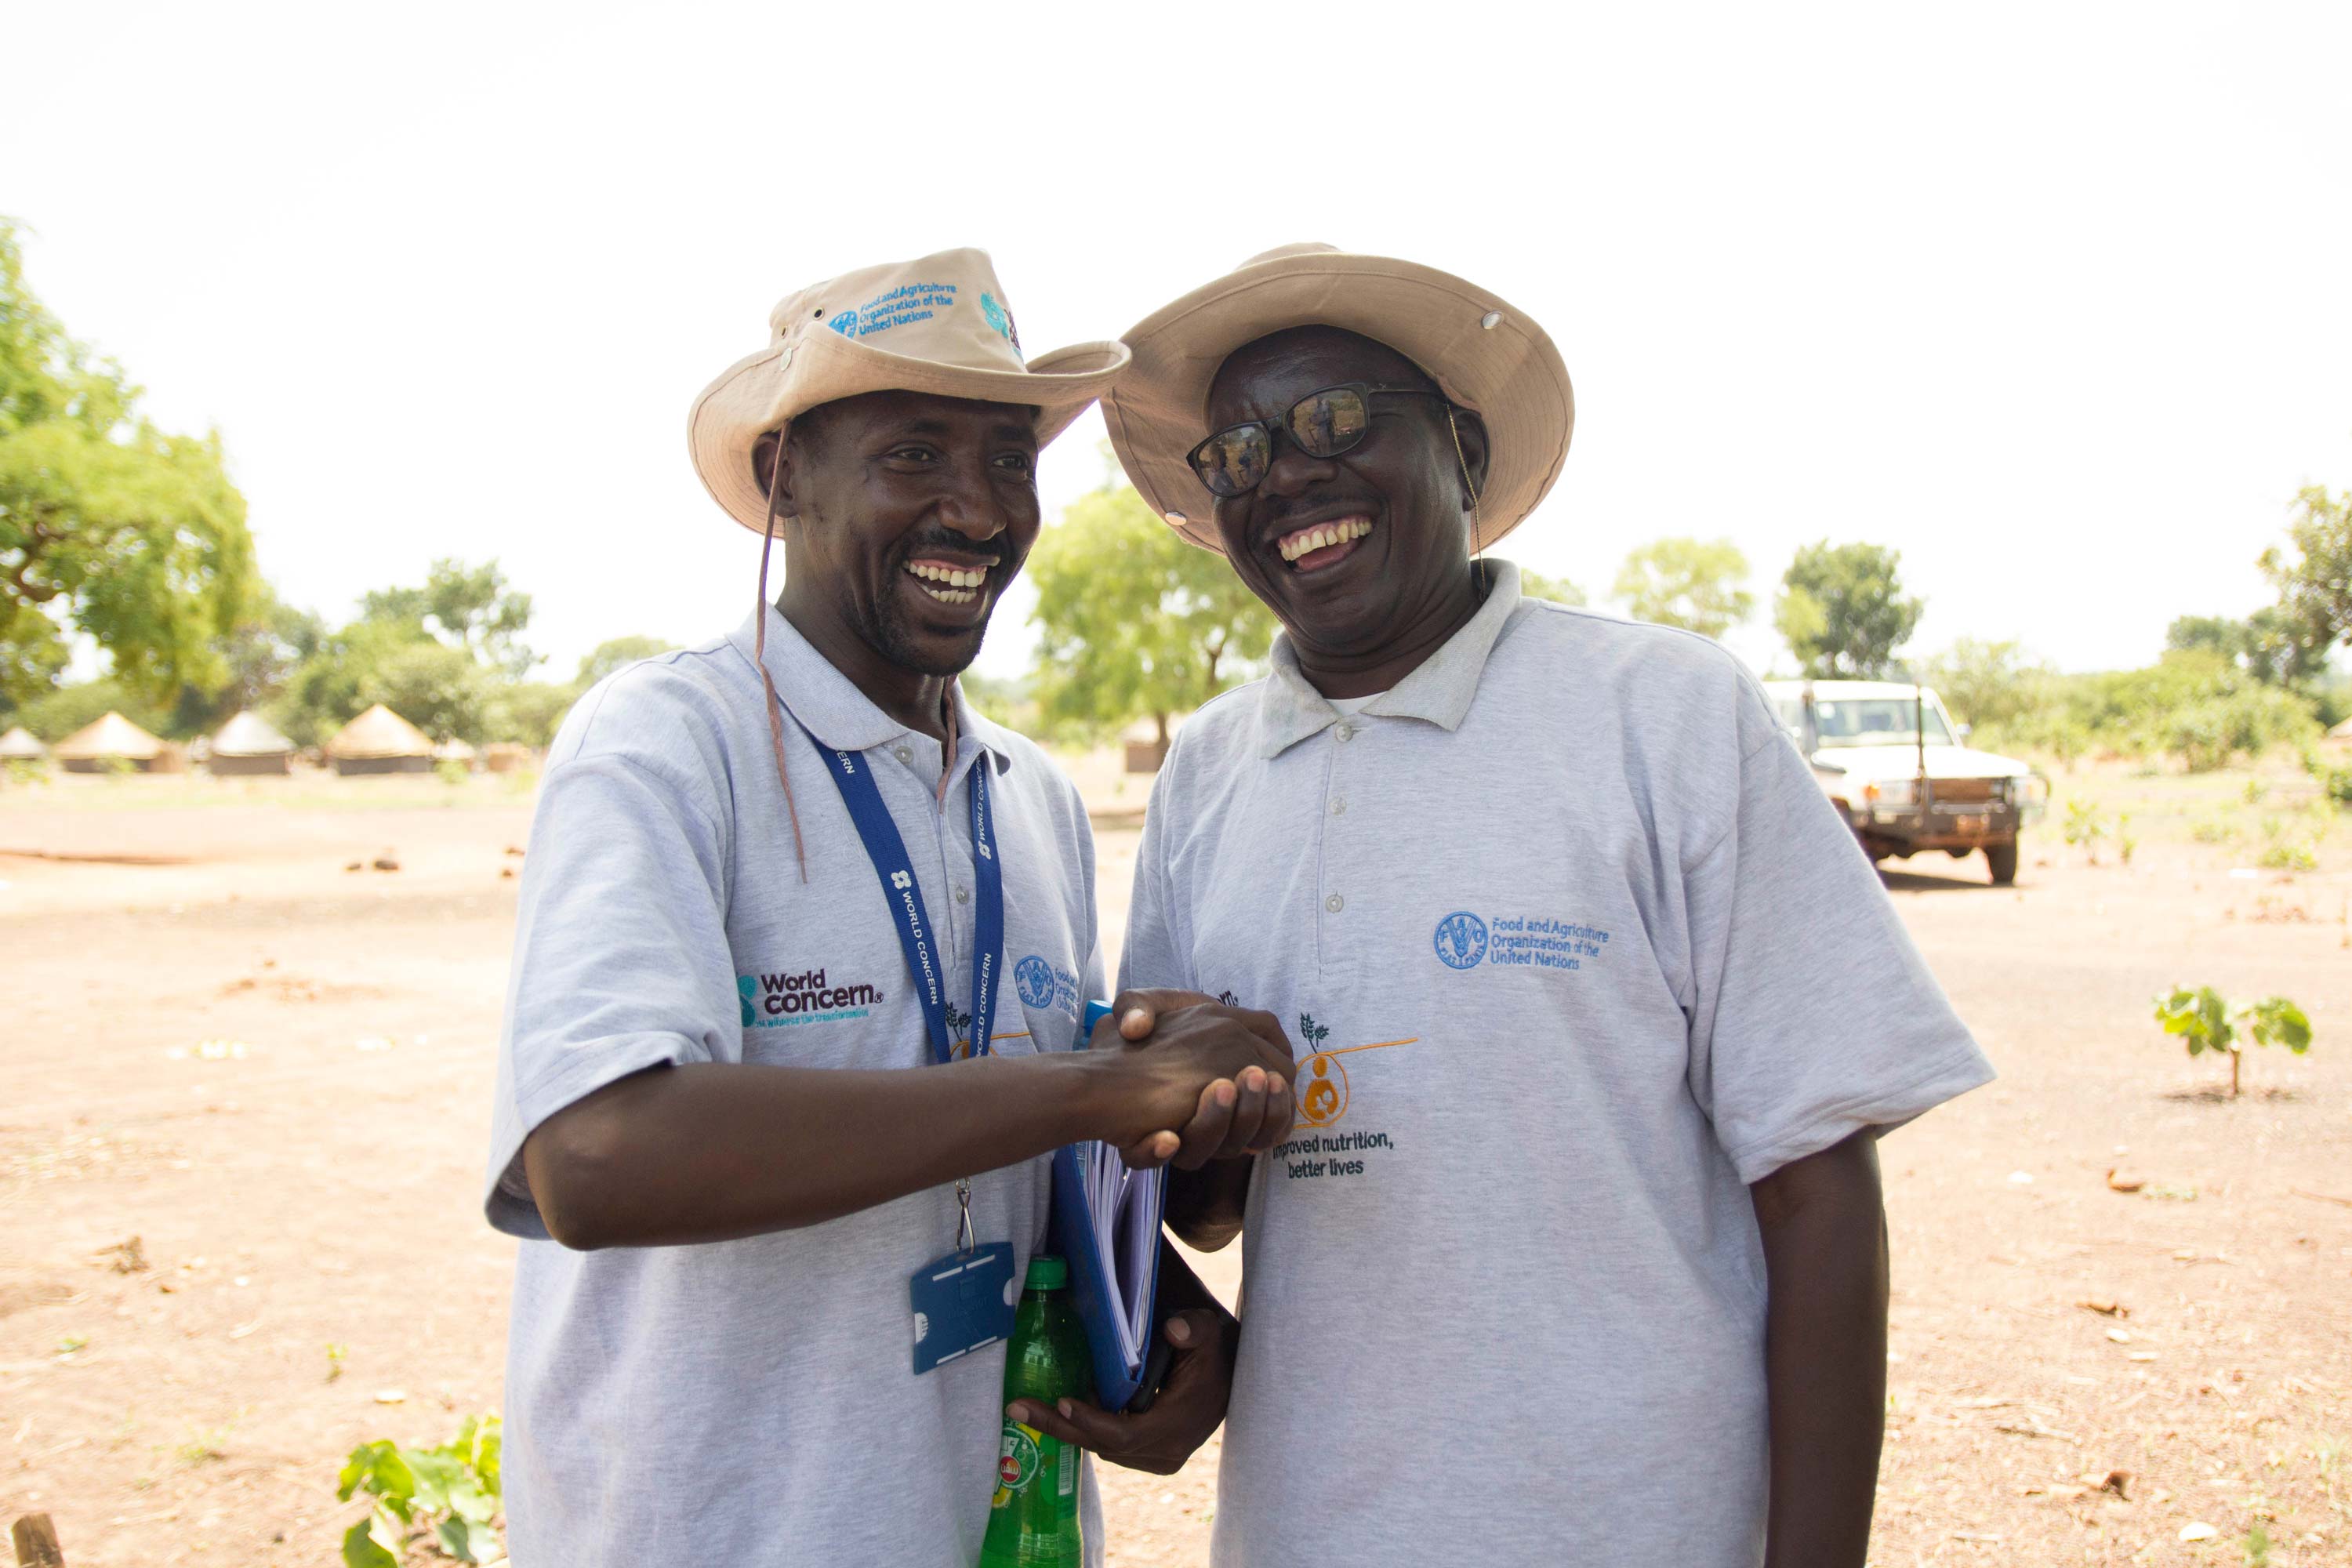 A World Concern staff member shakes hands with a partner